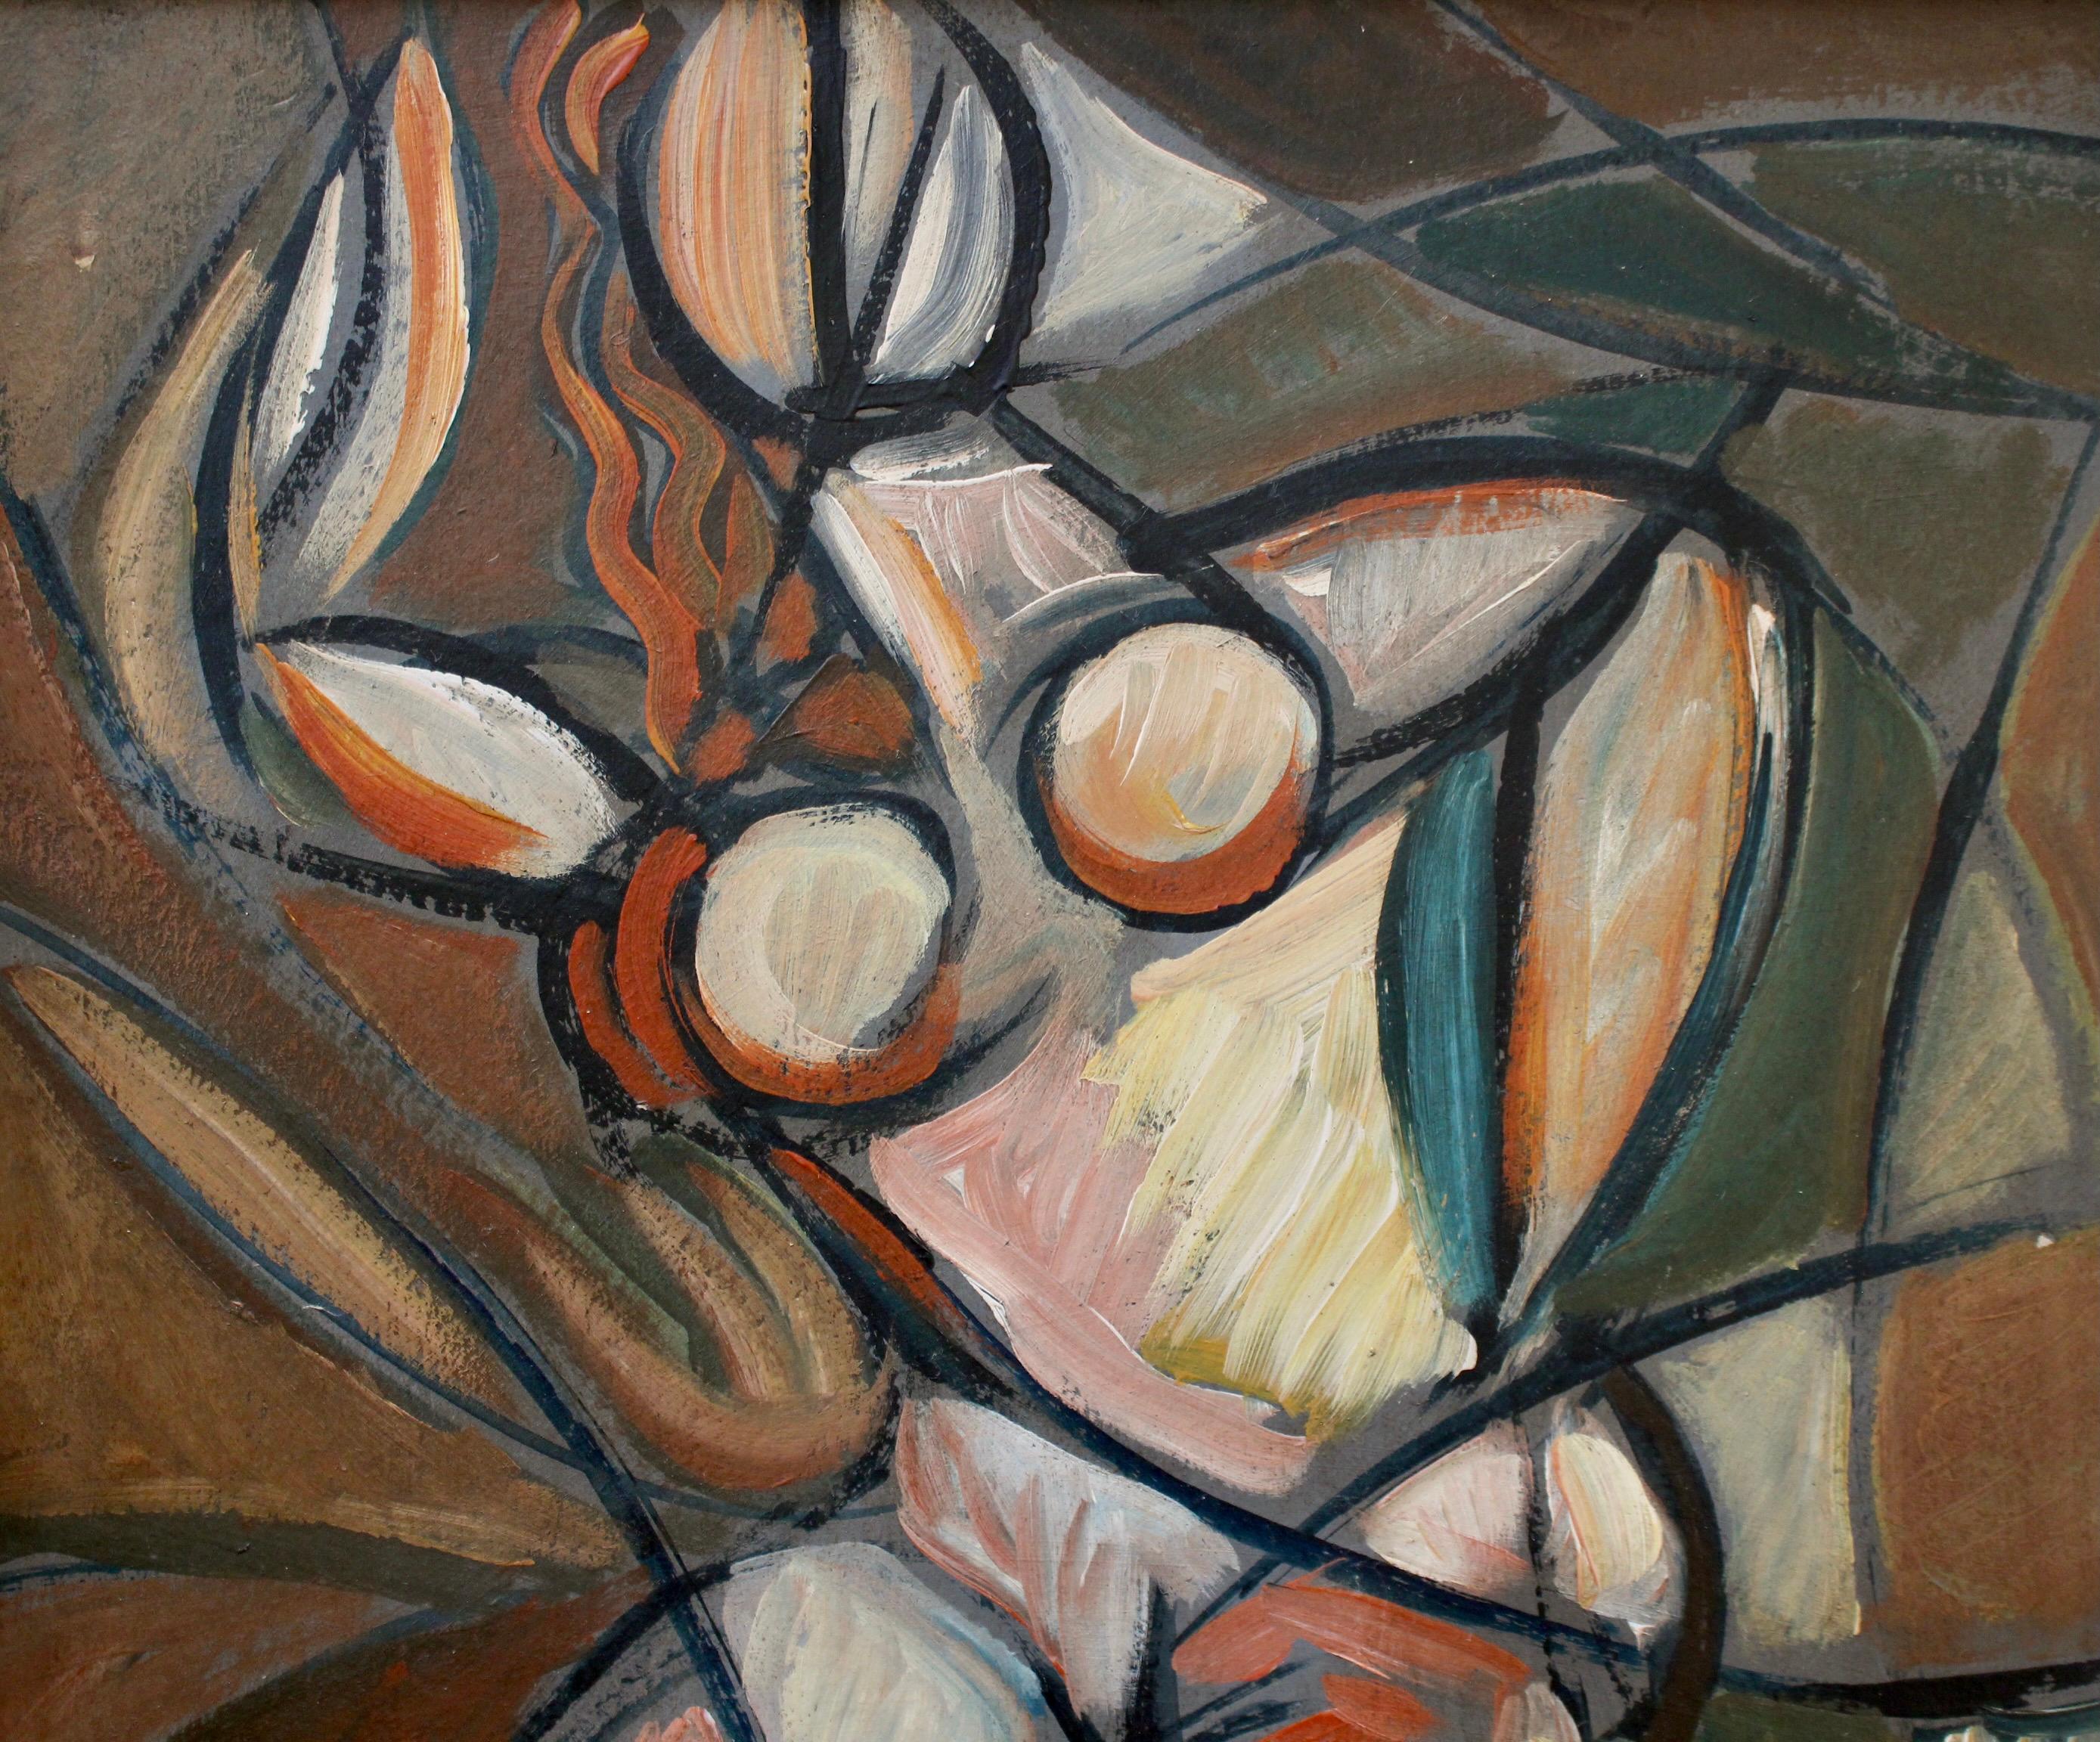 'Untitled Cubist Figure', oil on board, by STM (circa 1970s). A vibrant modern painting inspired by Picasso and Braque, the artist uses angles, lines and colour to create an entirely new dimension to painting. Cubists abandoned perspective and